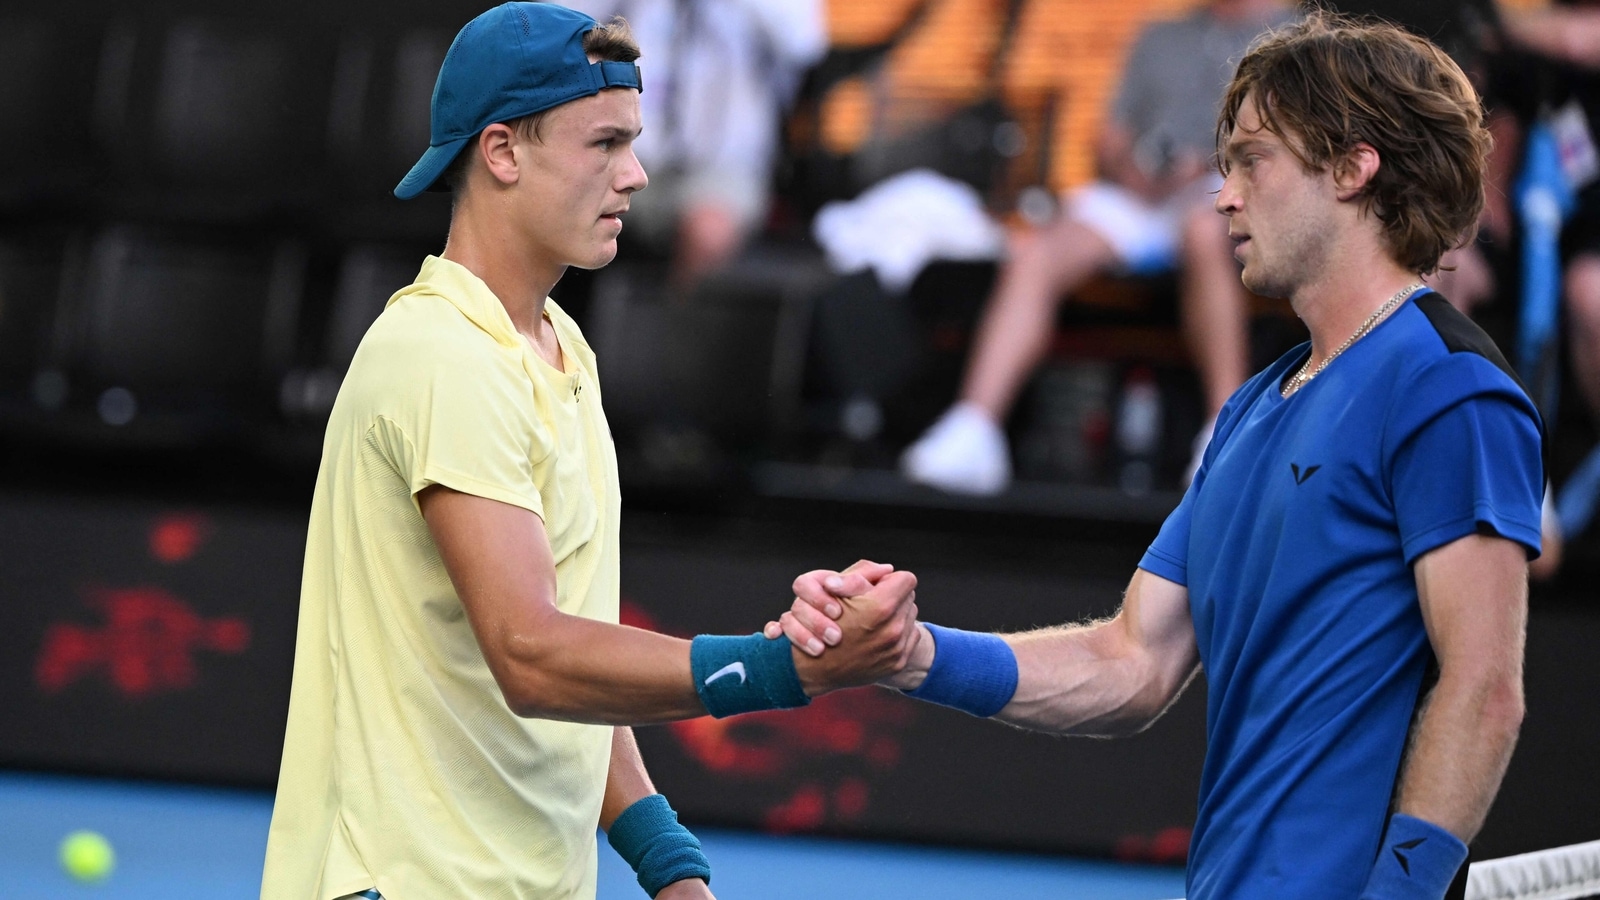 Aus Open Rublev beats wunderkind Rune with lucky net cord on match point Tennis News